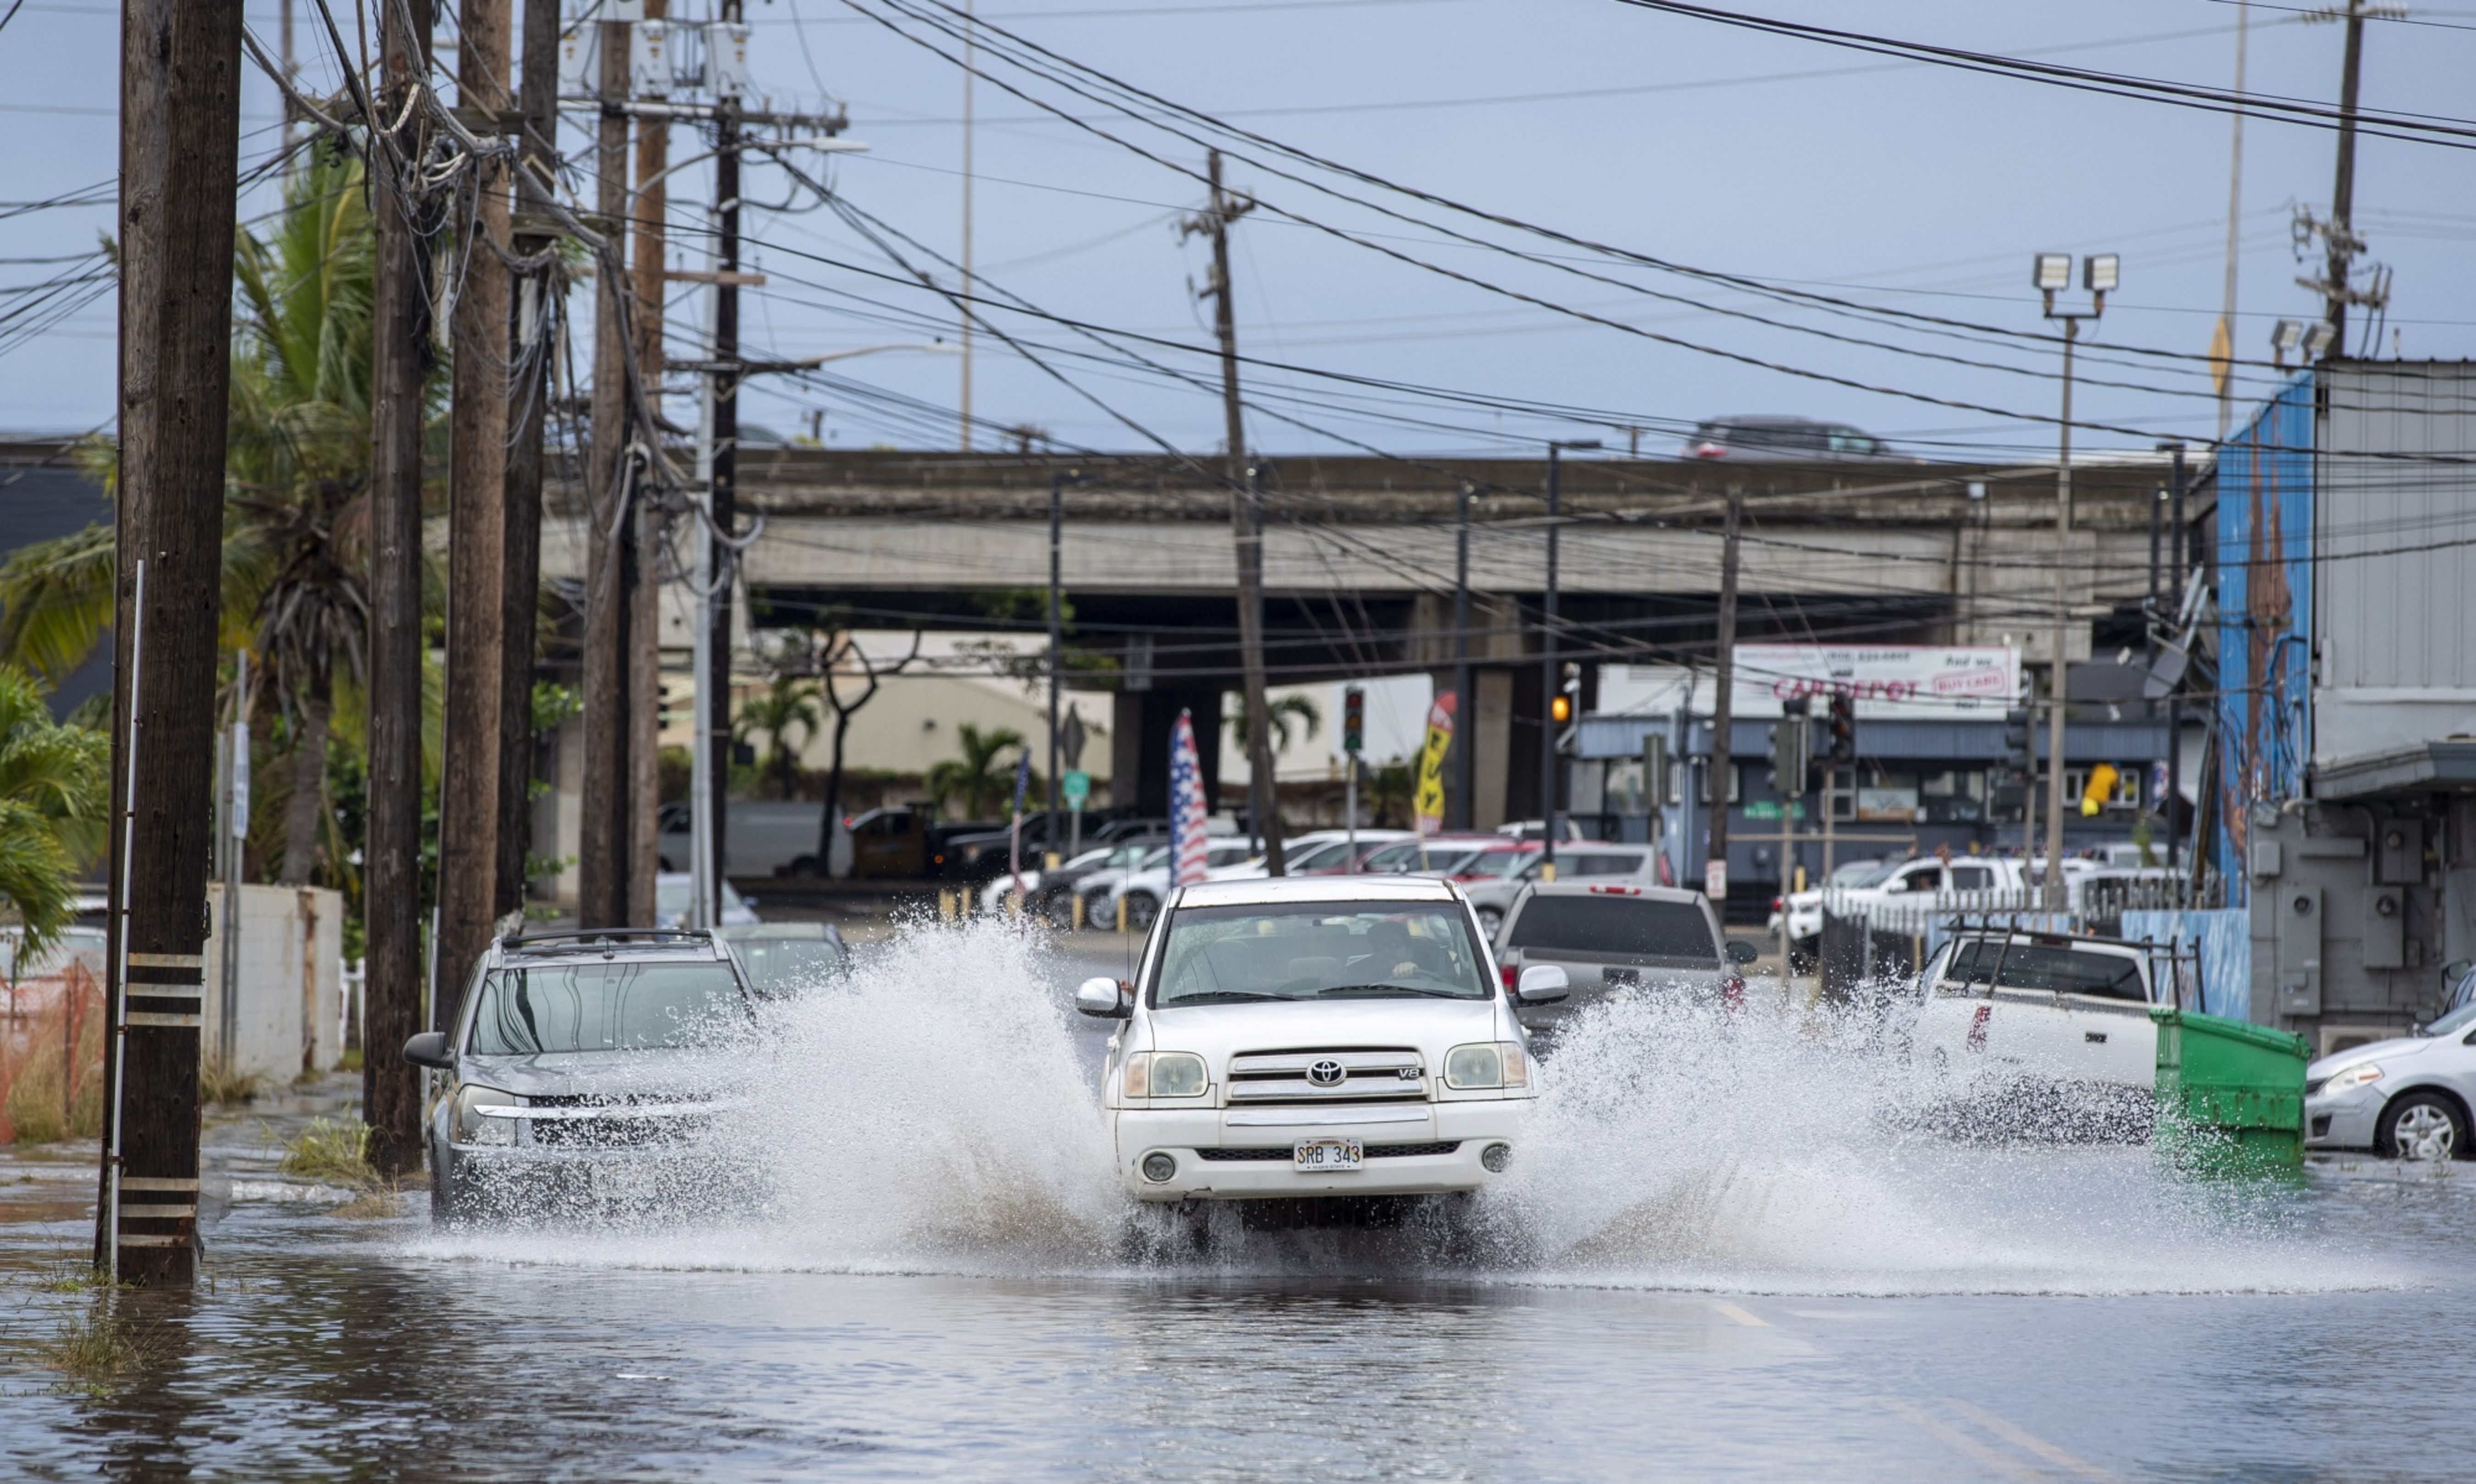 A pickup truck plows through a flooded street in Honolulu, Hawaii on Dec. 7, 2021. (Credit: Eugene Tanner/AFP/Getty Images)